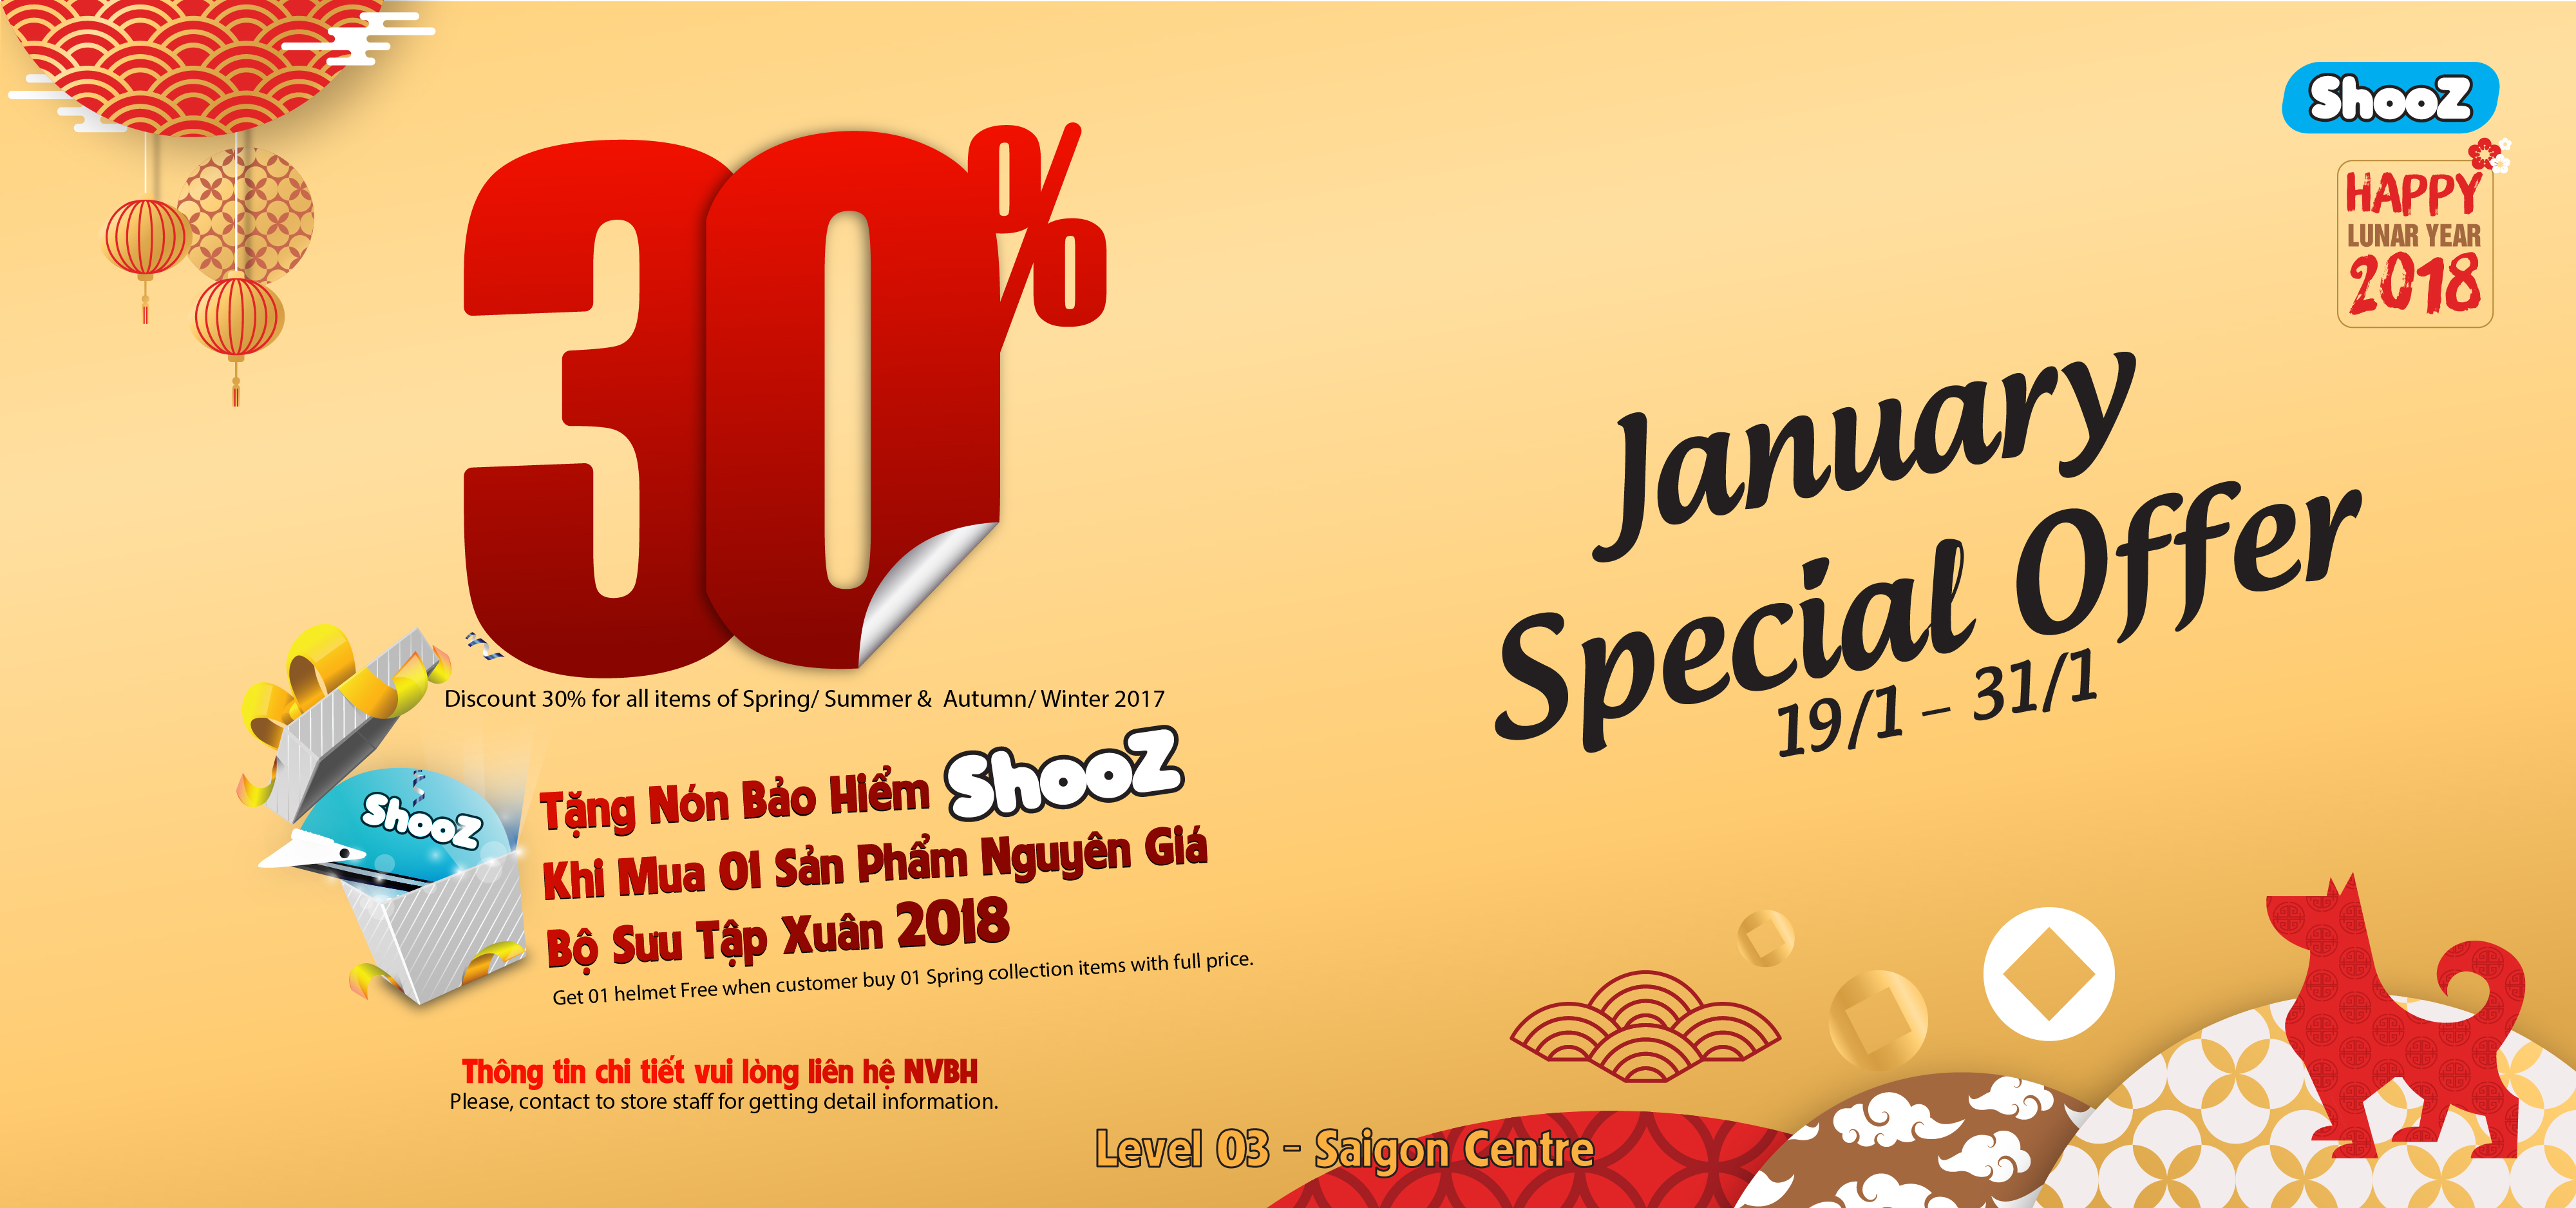 JANUARY SPECIAL OFFER